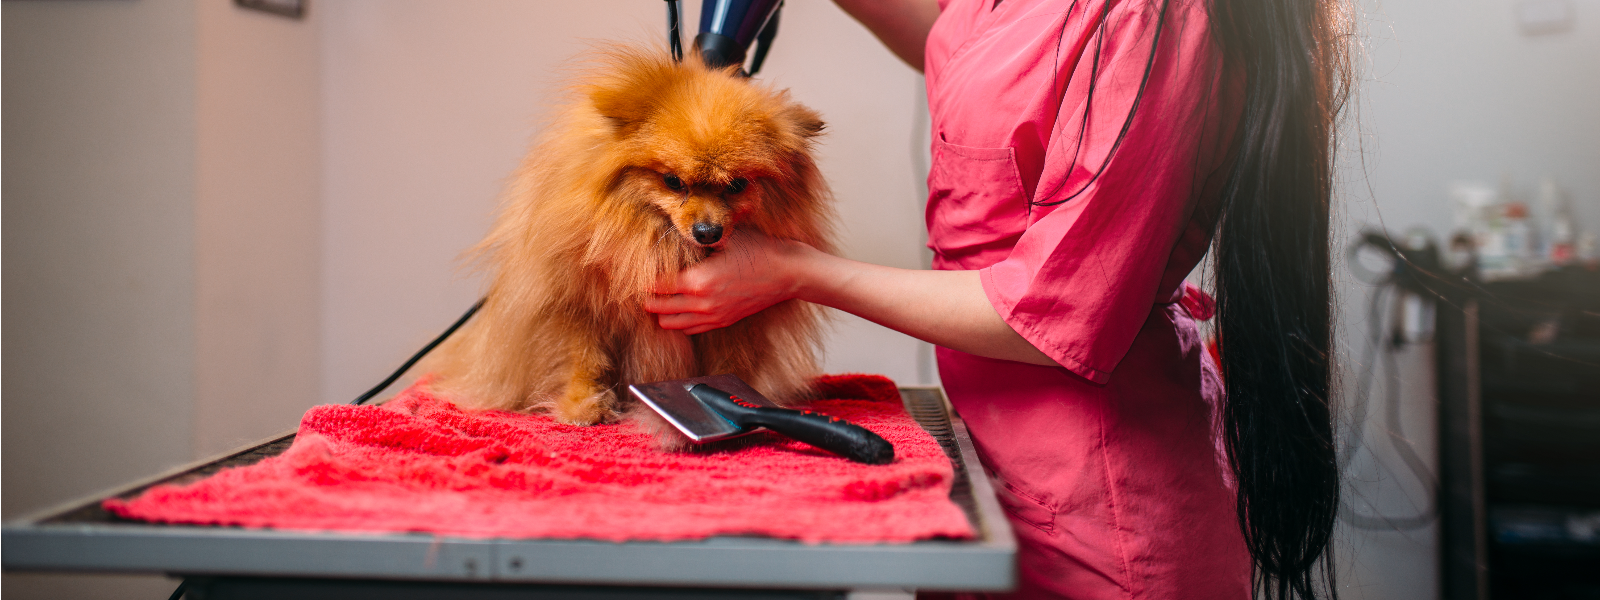 SILVERSHELL OÜ - We provide comprehensive pet grooming services, including ultrasound tooth cleaning, trimming, and nail ...